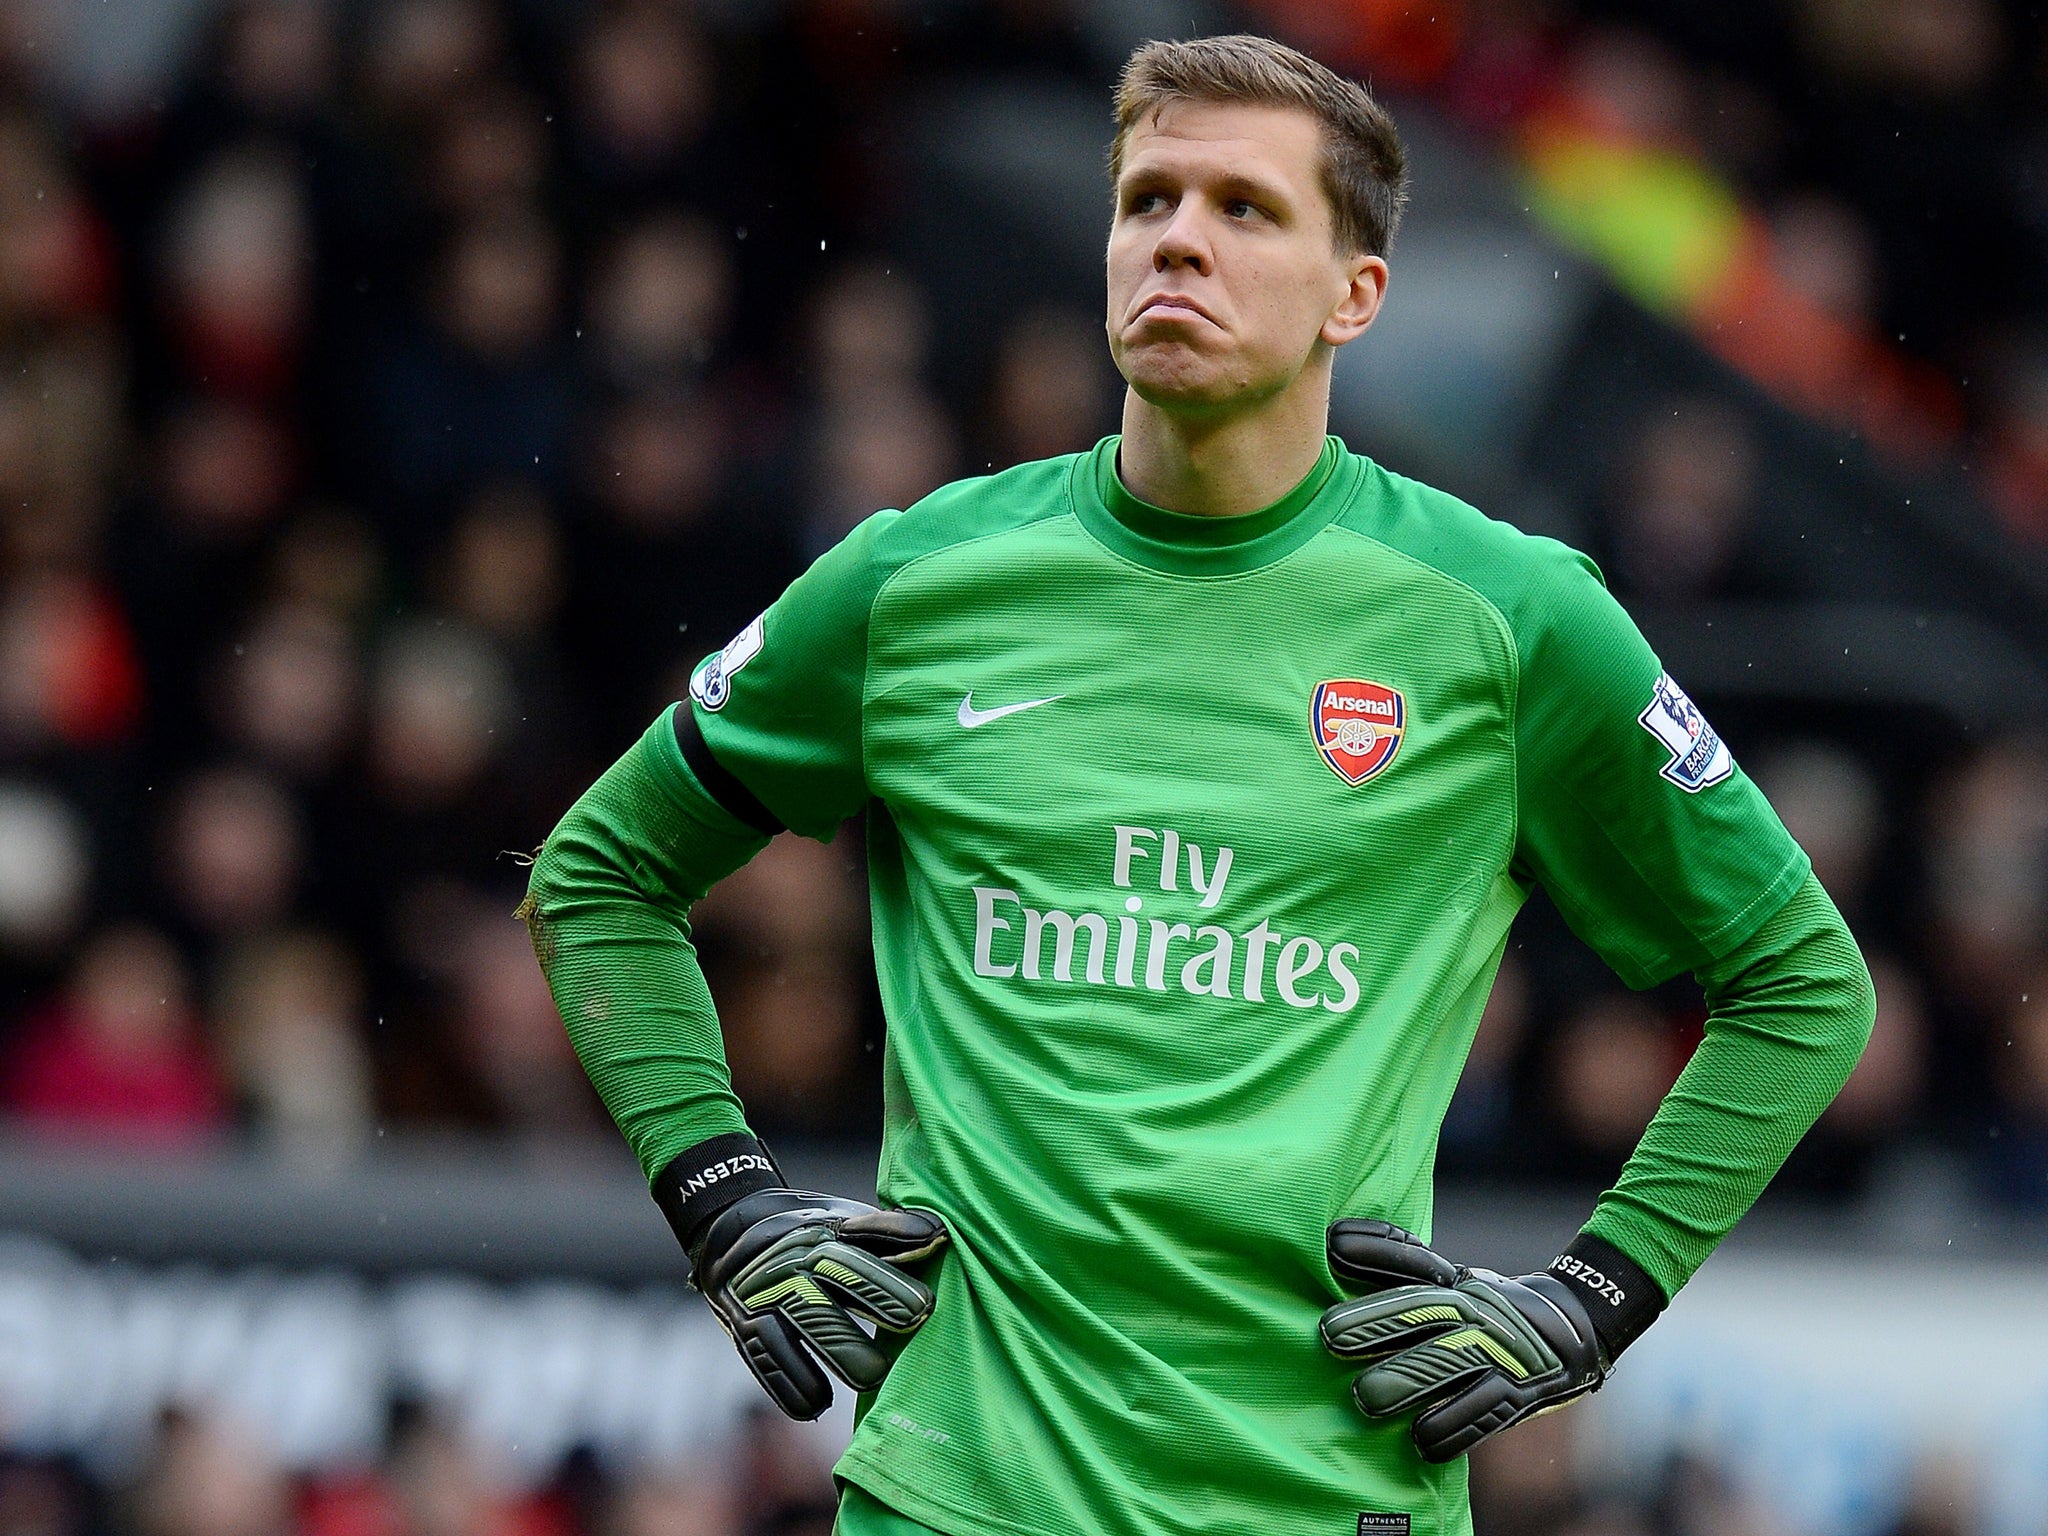 WOJCIECH SZCZESNY: Could do little to stem the tide as Liverpool attacked relentlessly - 5.